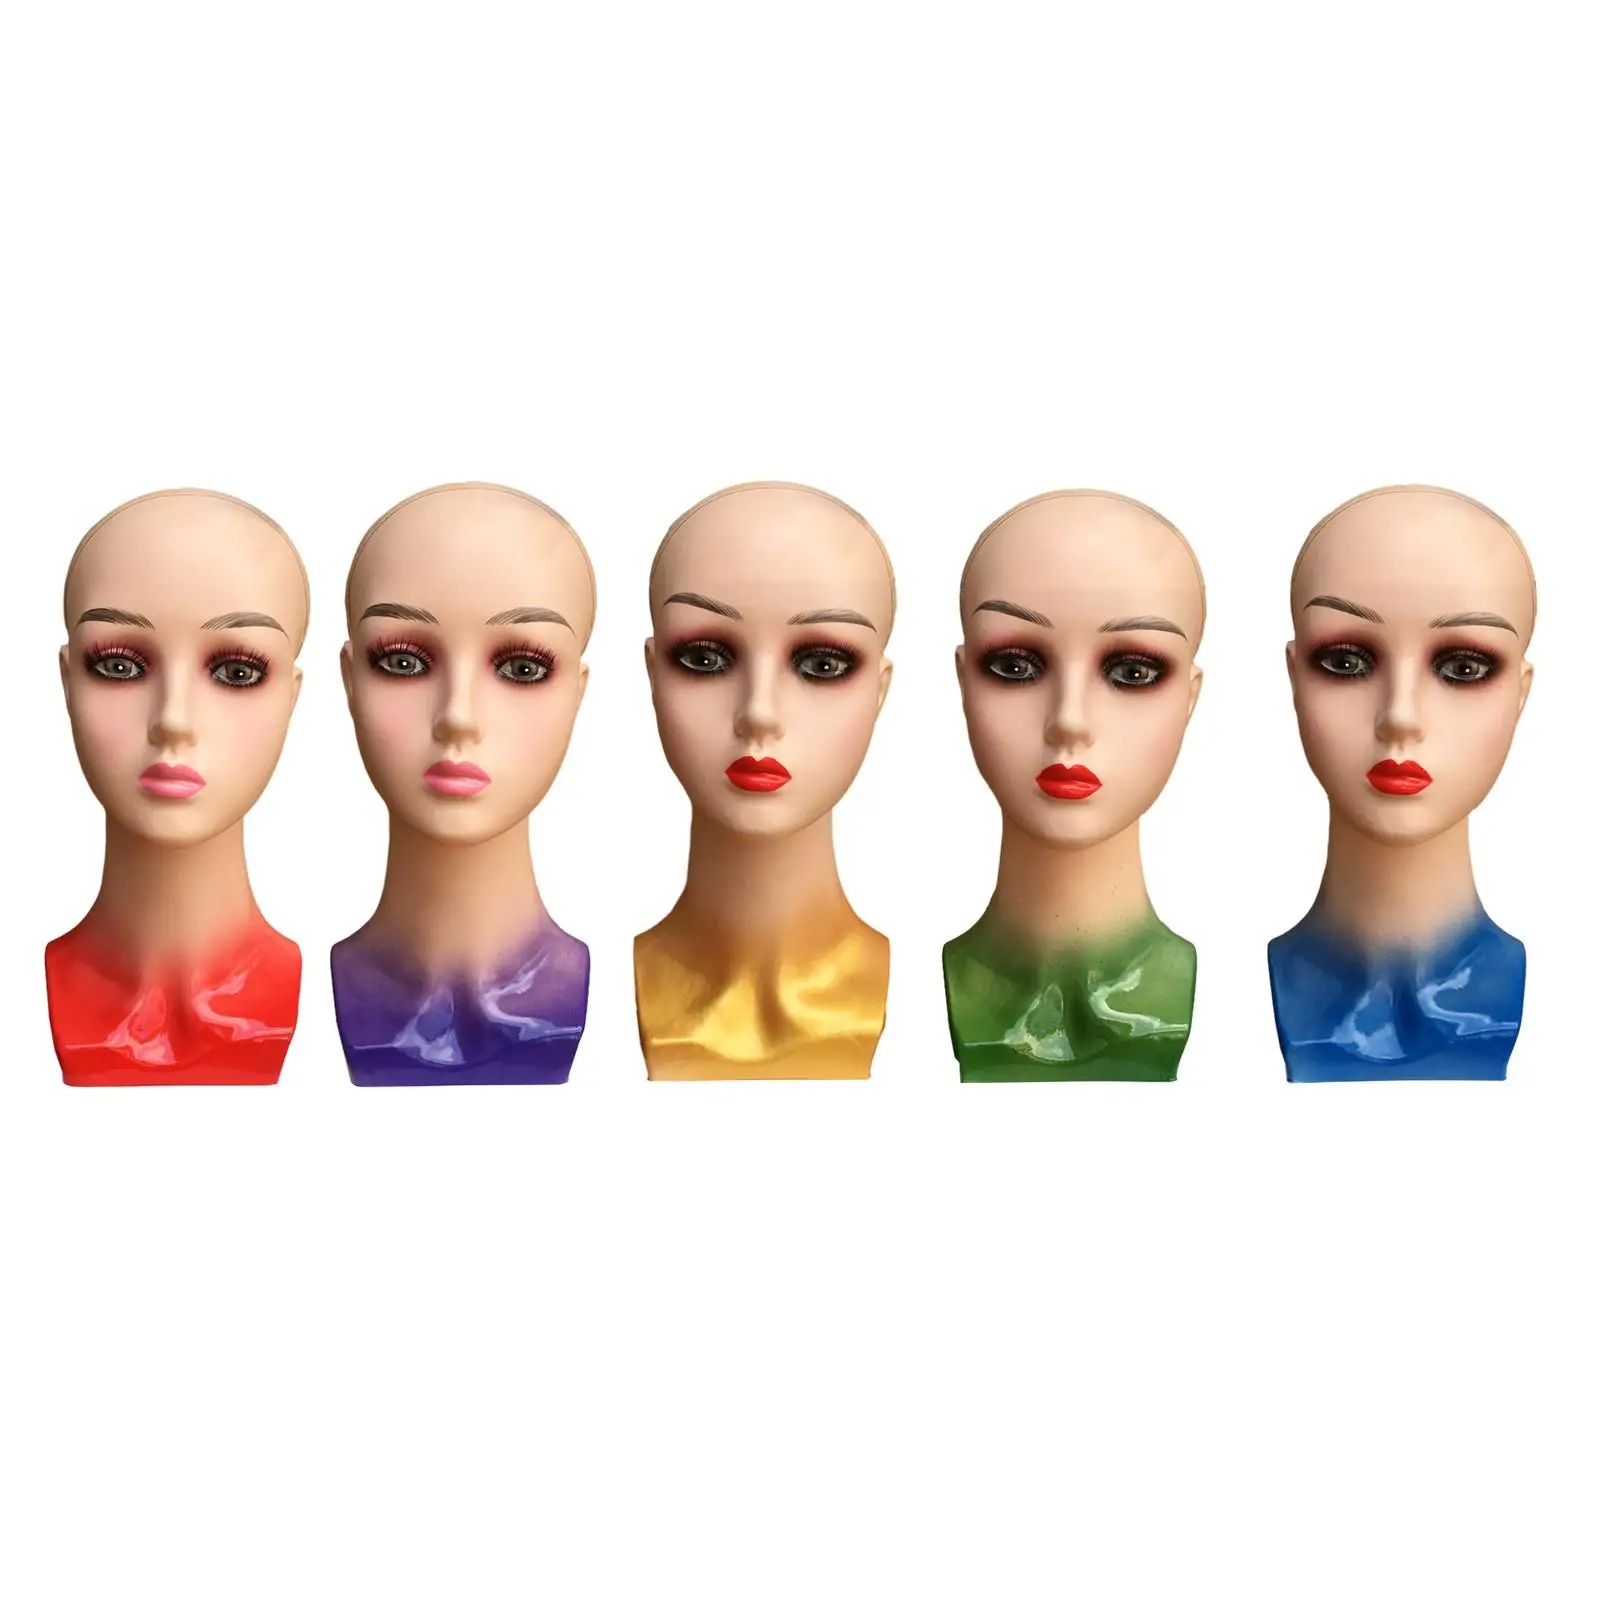 

Female Mannequin Head Wig Holder Professional Smooth Manikin Wig Head Stands Wig Display Model for Hairpieces Wigs Making Hats